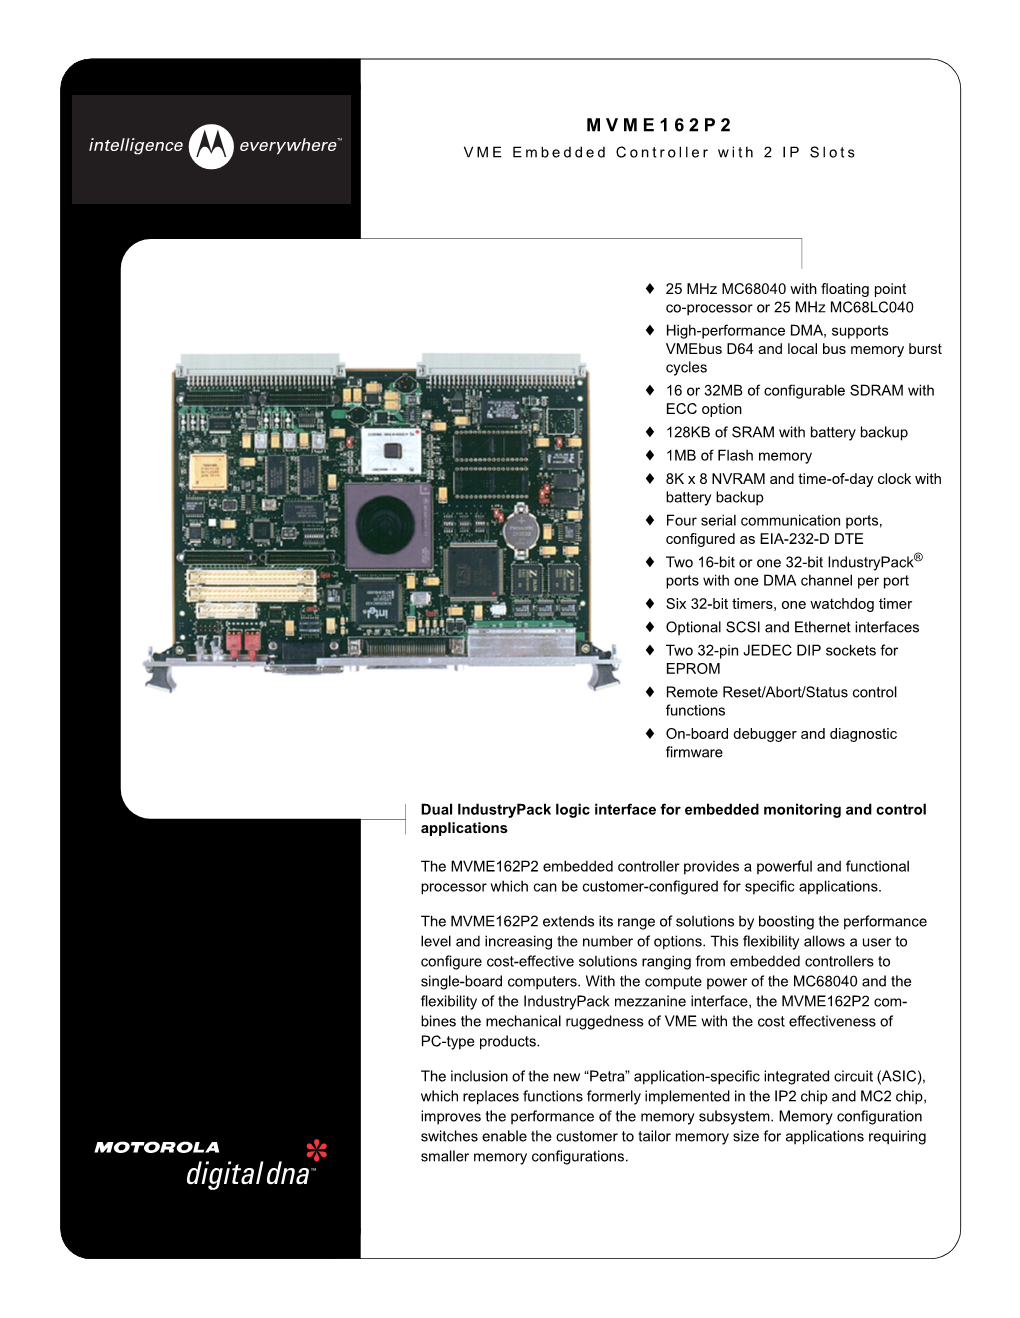 MVME162P2 VME Embedded Controller with 2 IP Slots Data Sheet